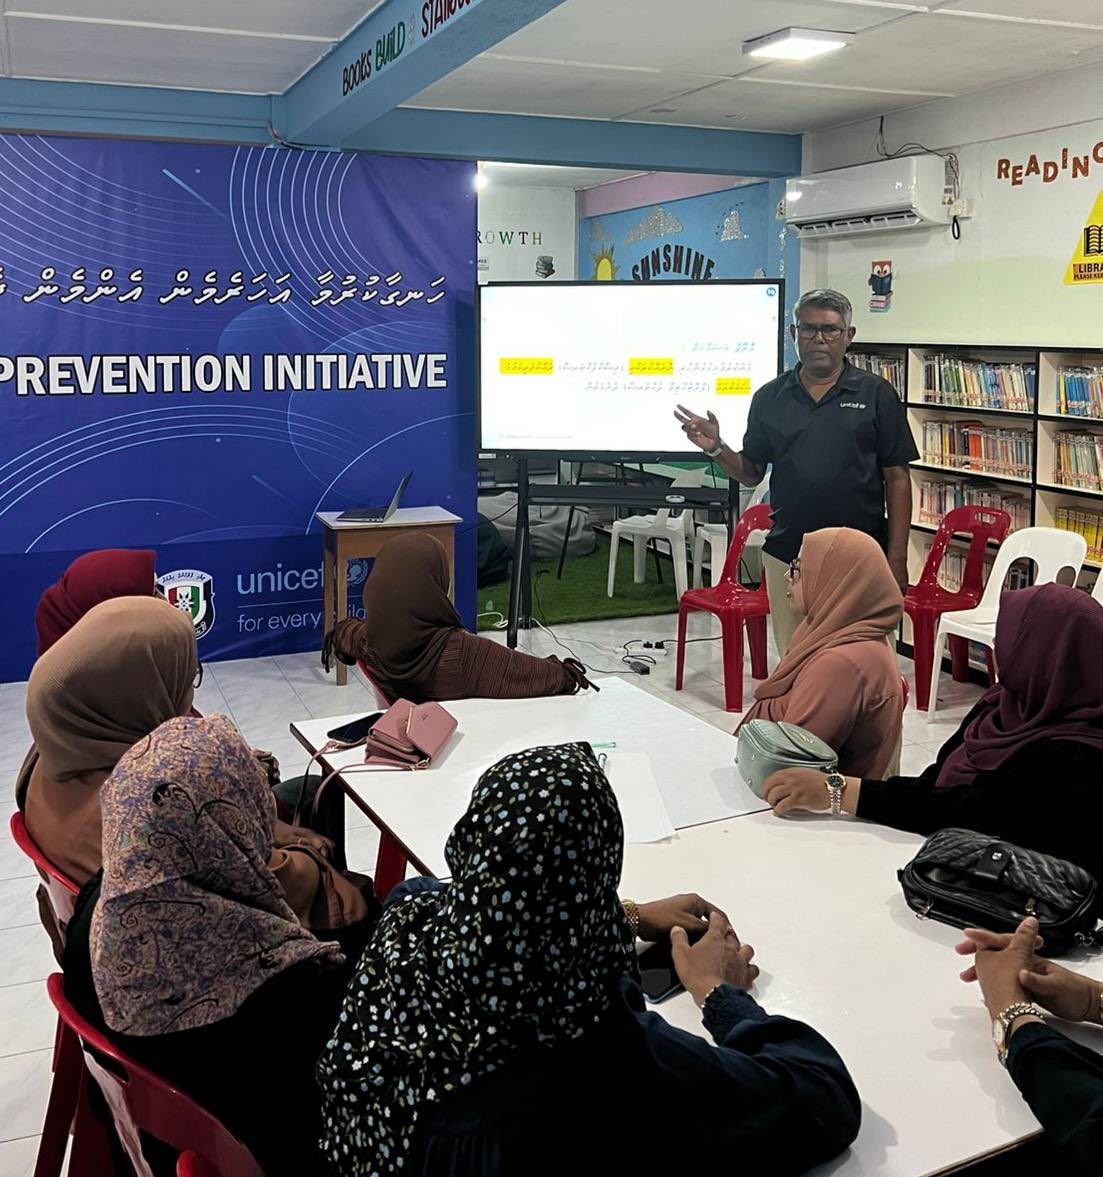 Bullying in school can have severe & long-lasting impacts on learners’ physical & mental health as well as their education & future. UNICEF @PoliceMv & @MoEmv consulted with students, teachers & parents in Fuvamulah City to establish schools safe for learning #ForEveryChild.